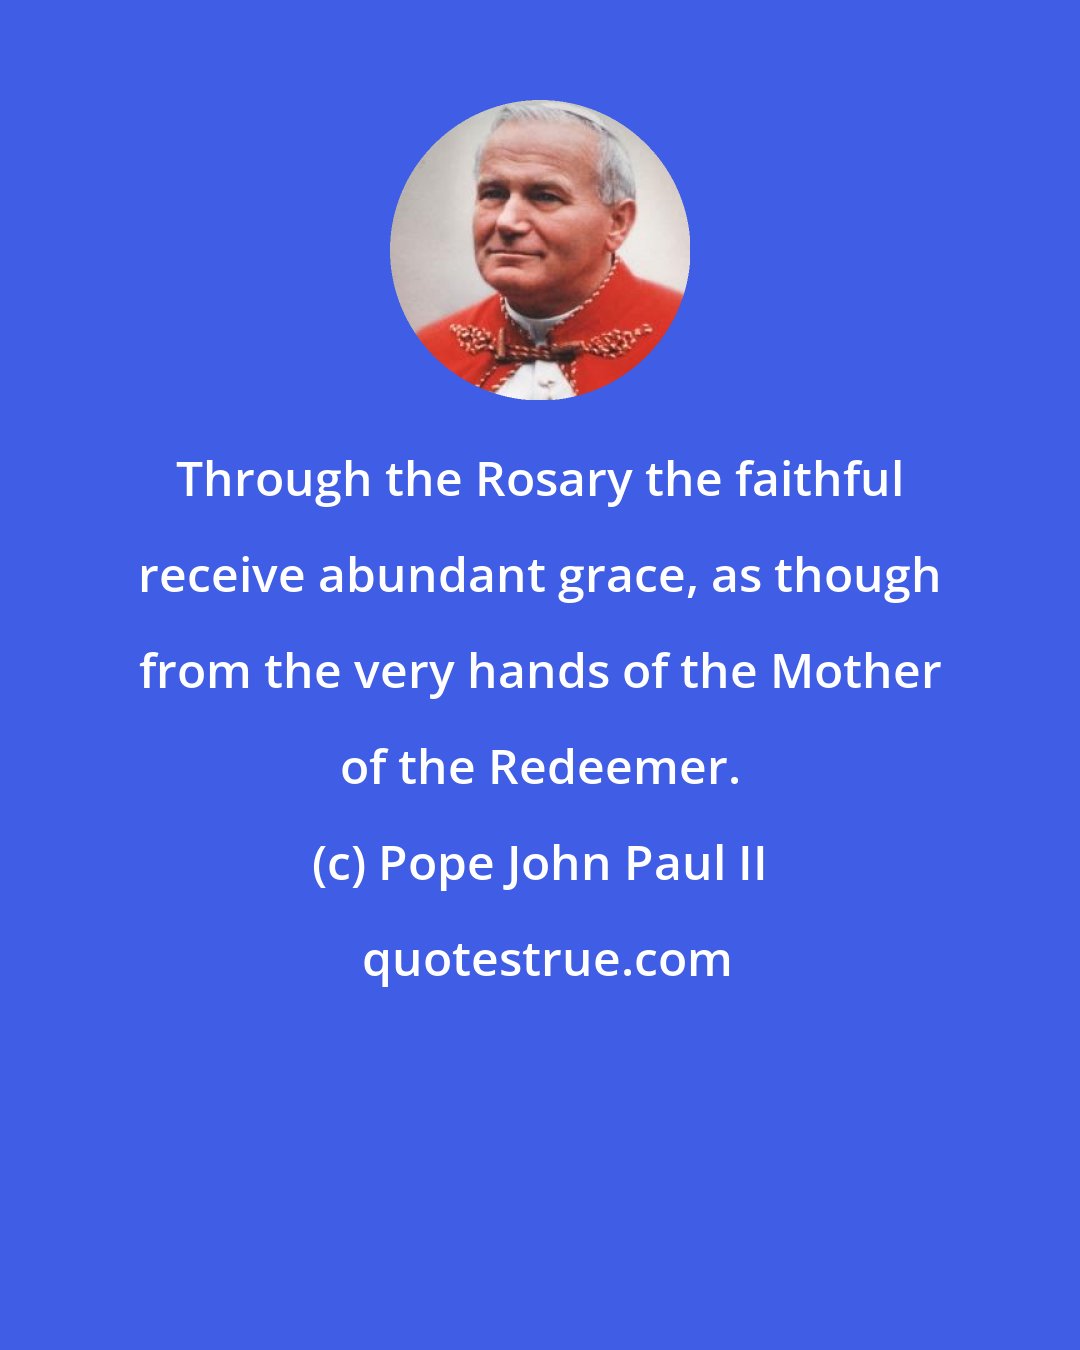 Pope John Paul II: Through the Rosary the faithful receive abundant grace, as though from the very hands of the Mother of the Redeemer.